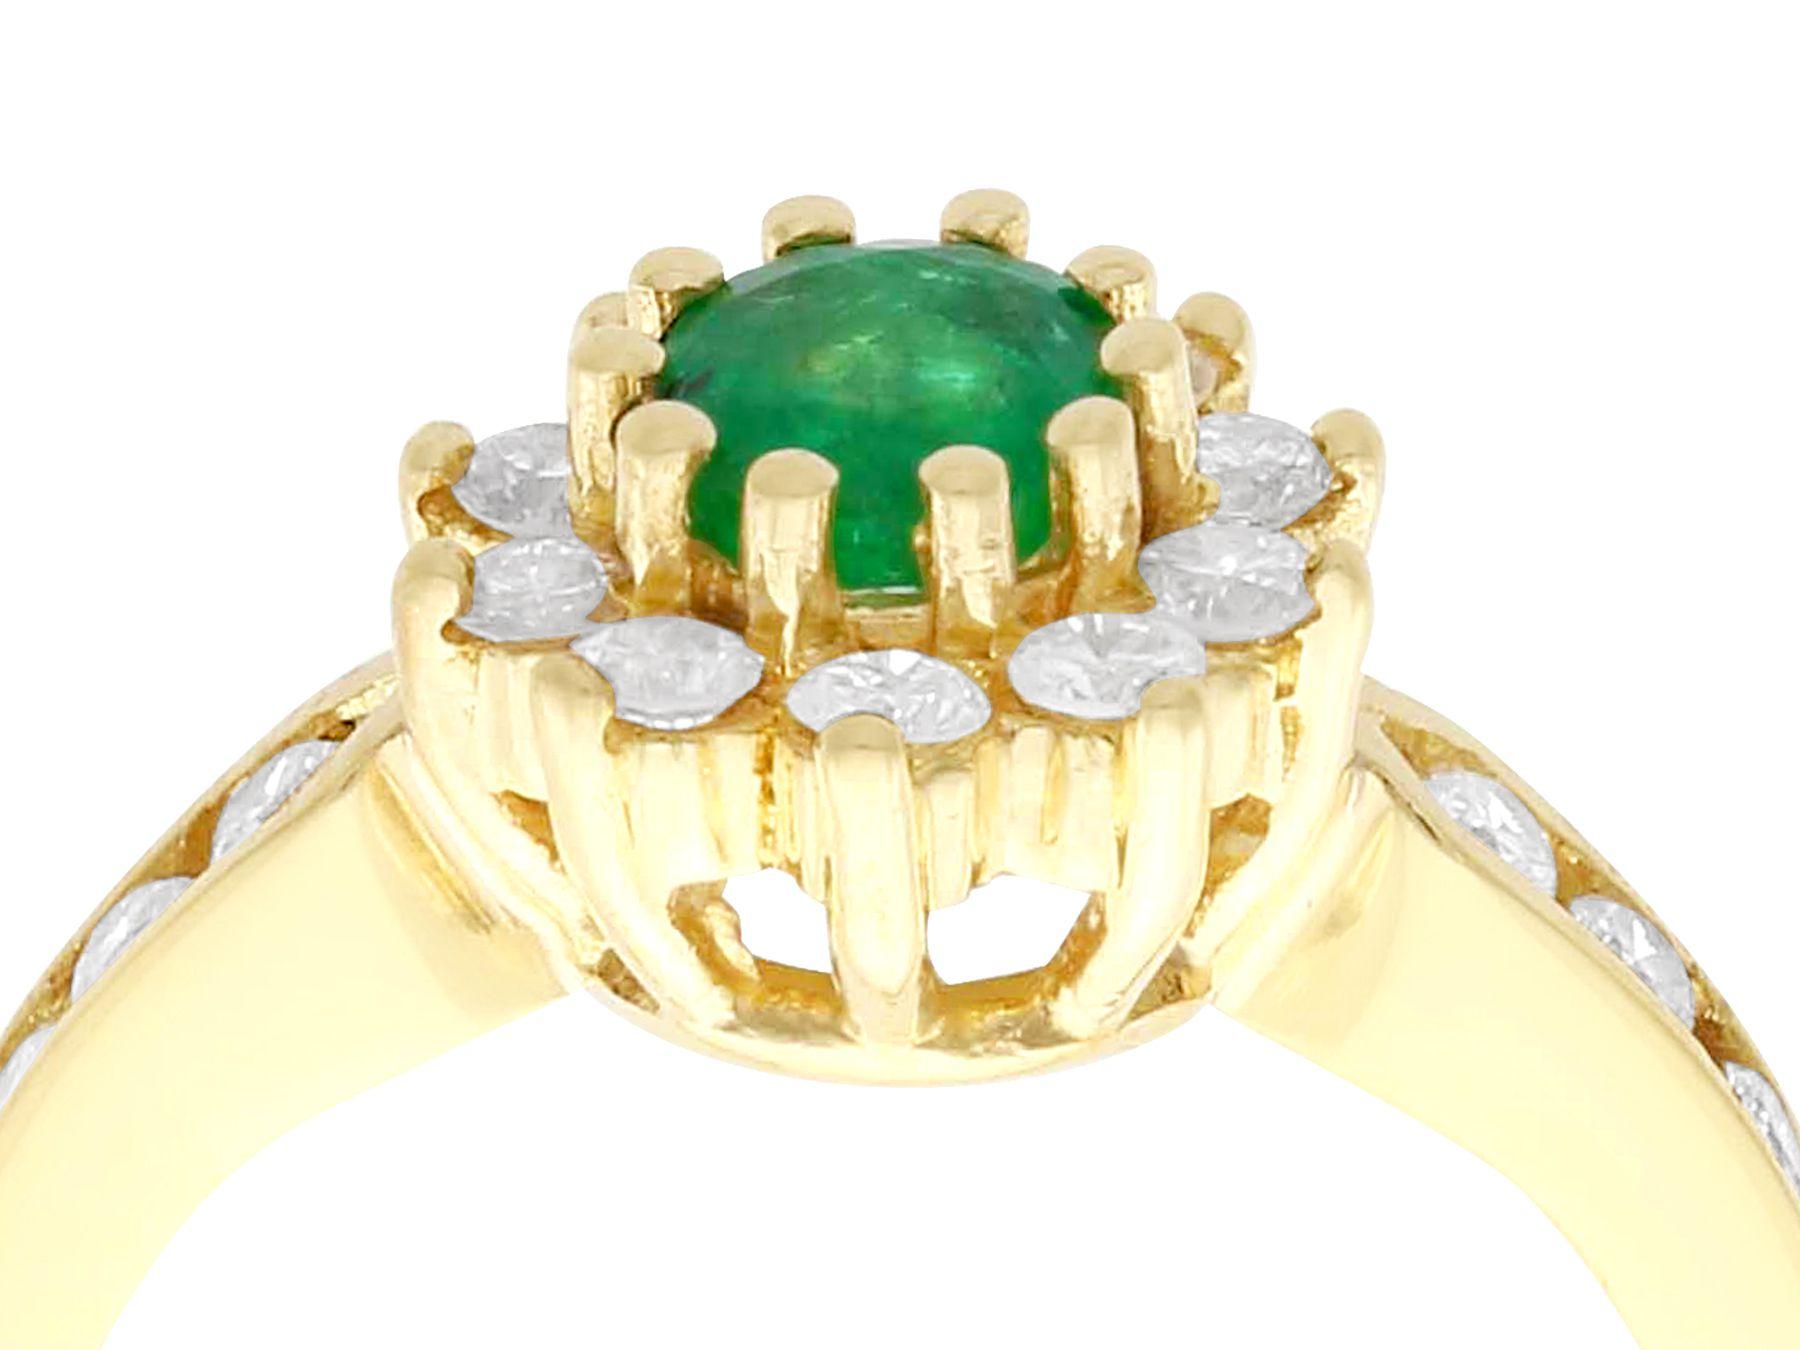 A very good 0.30 carat natural emerald and 0.38 carat diamond, 18 karat yellow gold cluster ring; an addition to our vintage jewelry collections.

This vintage cocktail ring has been crafted in 18 karat yellow gold.

The pierced decorated boat style